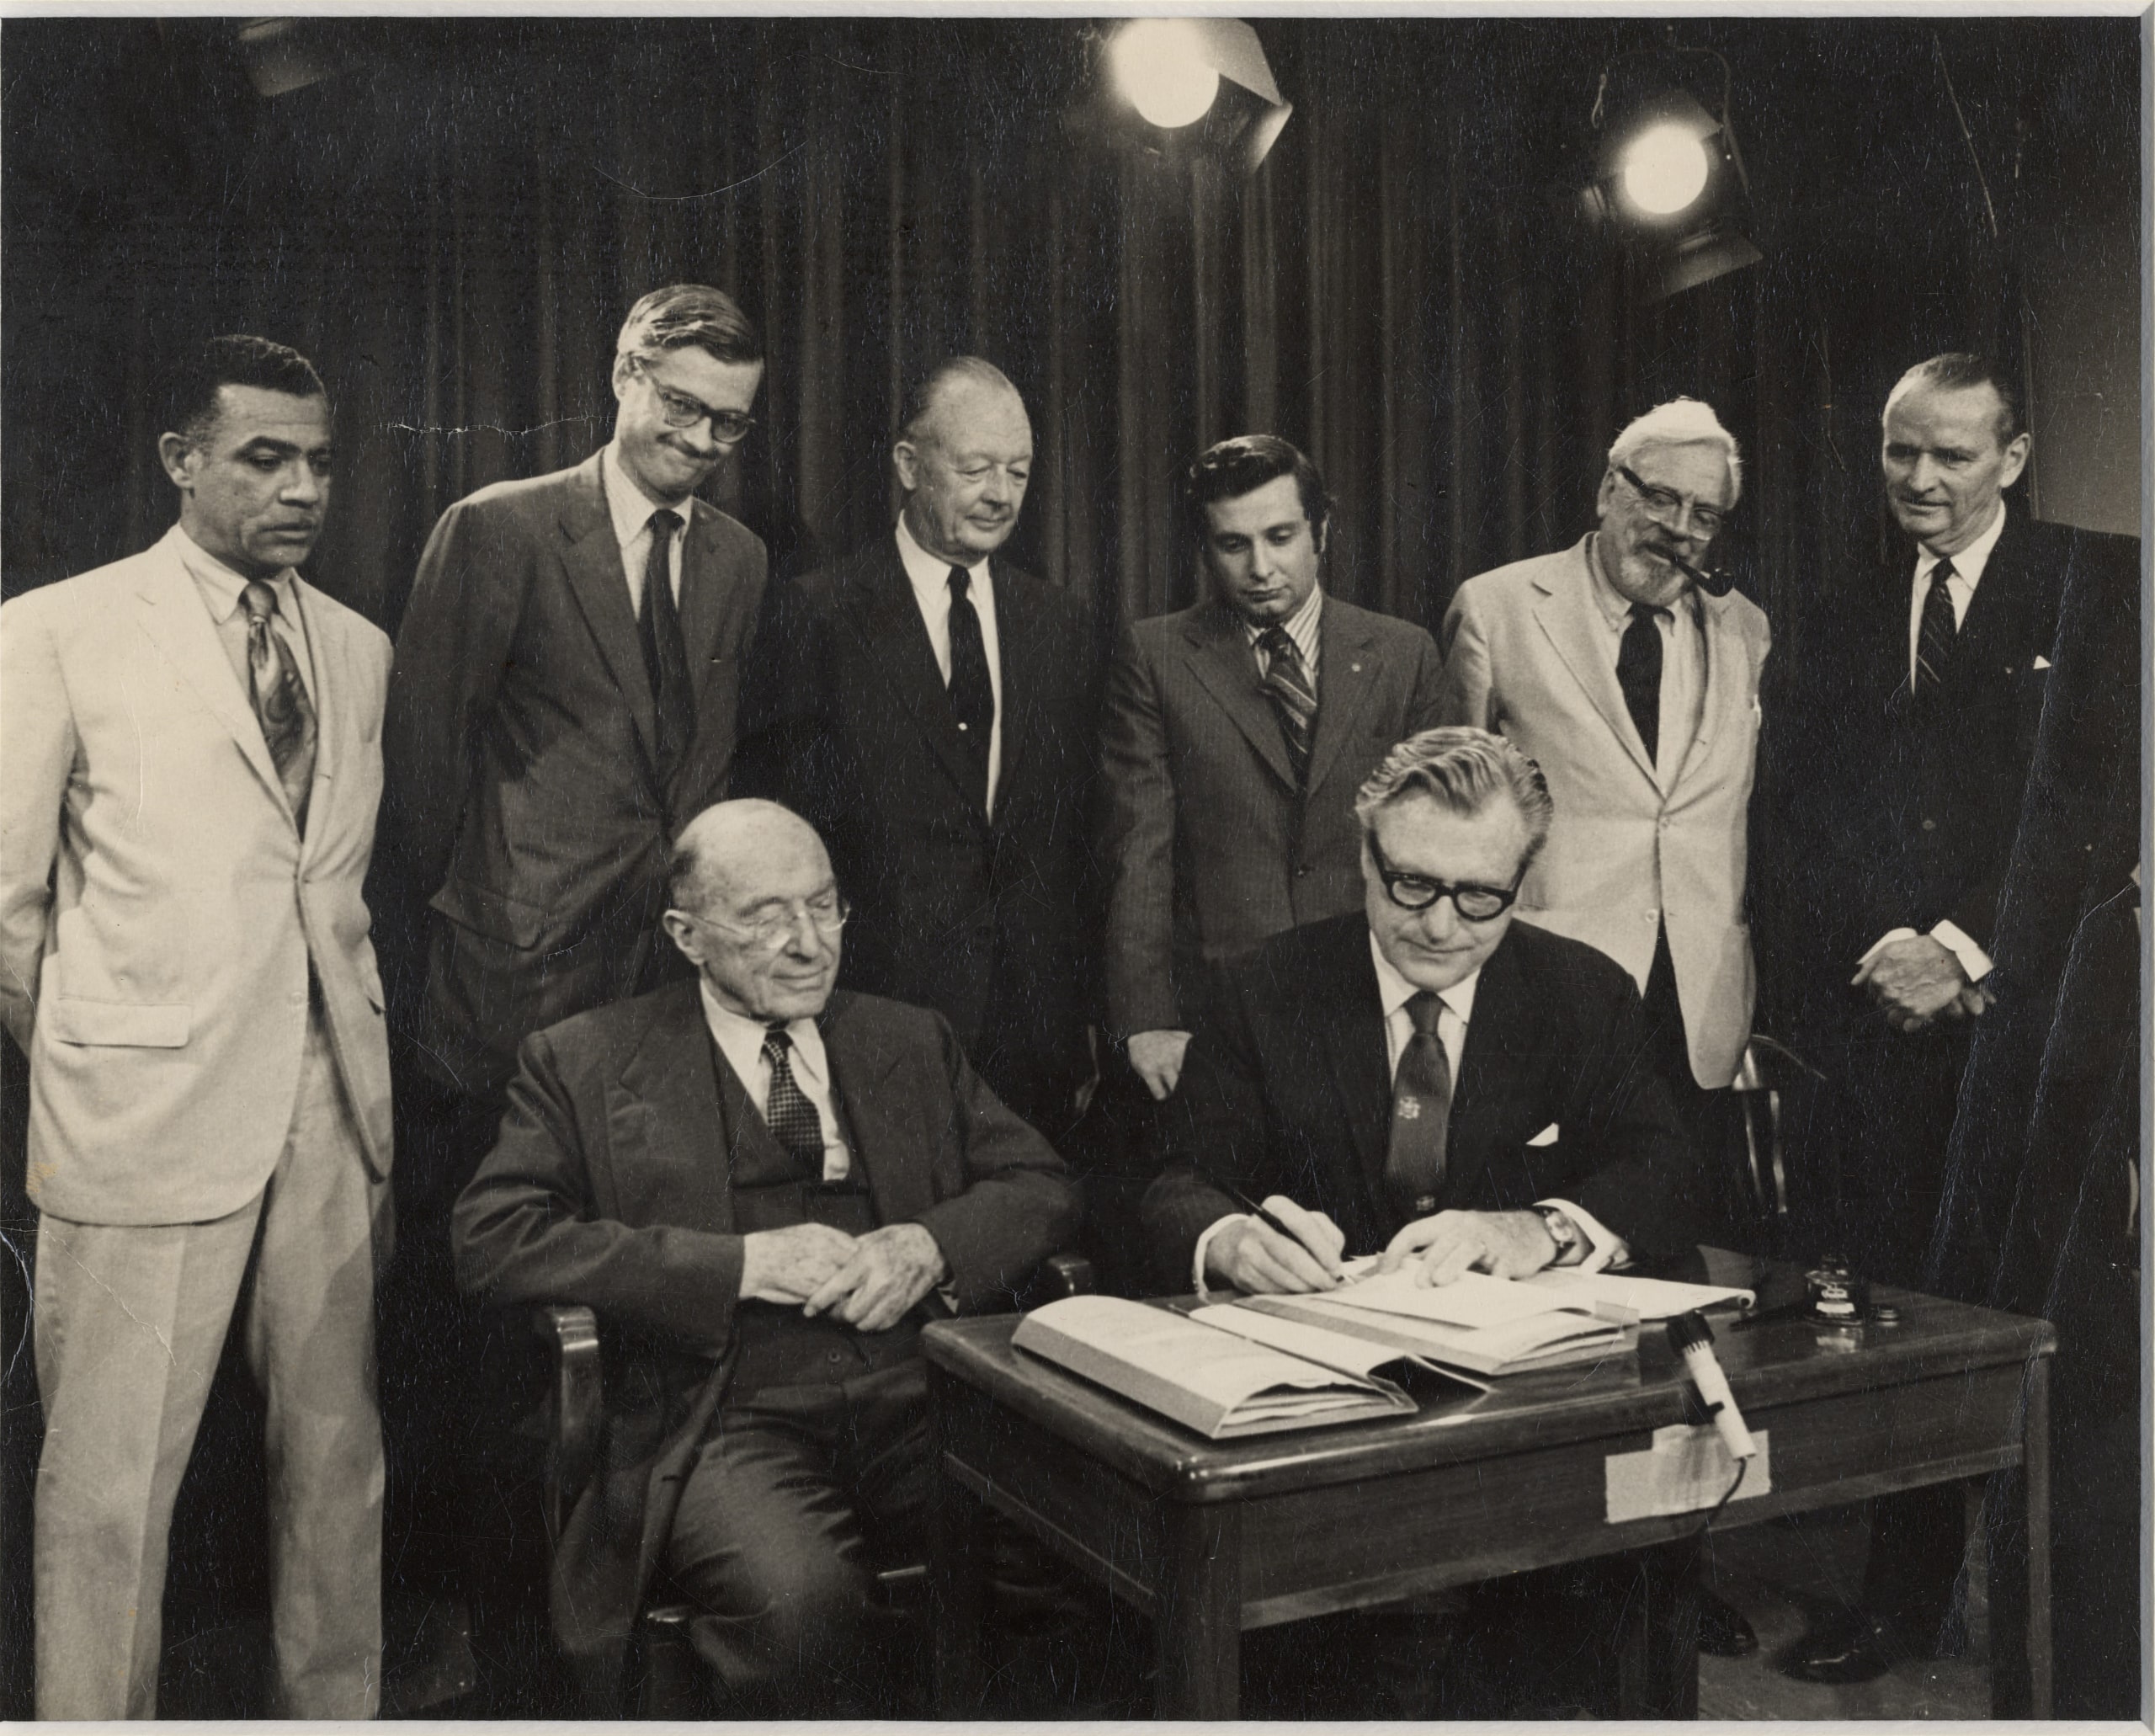 Gov. Nelson Rockefeller signs the Adirondack Park Agency Act on June 22, [sic] 1971 as commissioners (left to right) Fred O’Neal, Peter Paine, Stewart Kilbourne, Henry Diamond, Robert Hall, Richard Lawrence and (seated) Chairman Harold Hochschild look on. New York State photo from the collection of the Lake George Mirror